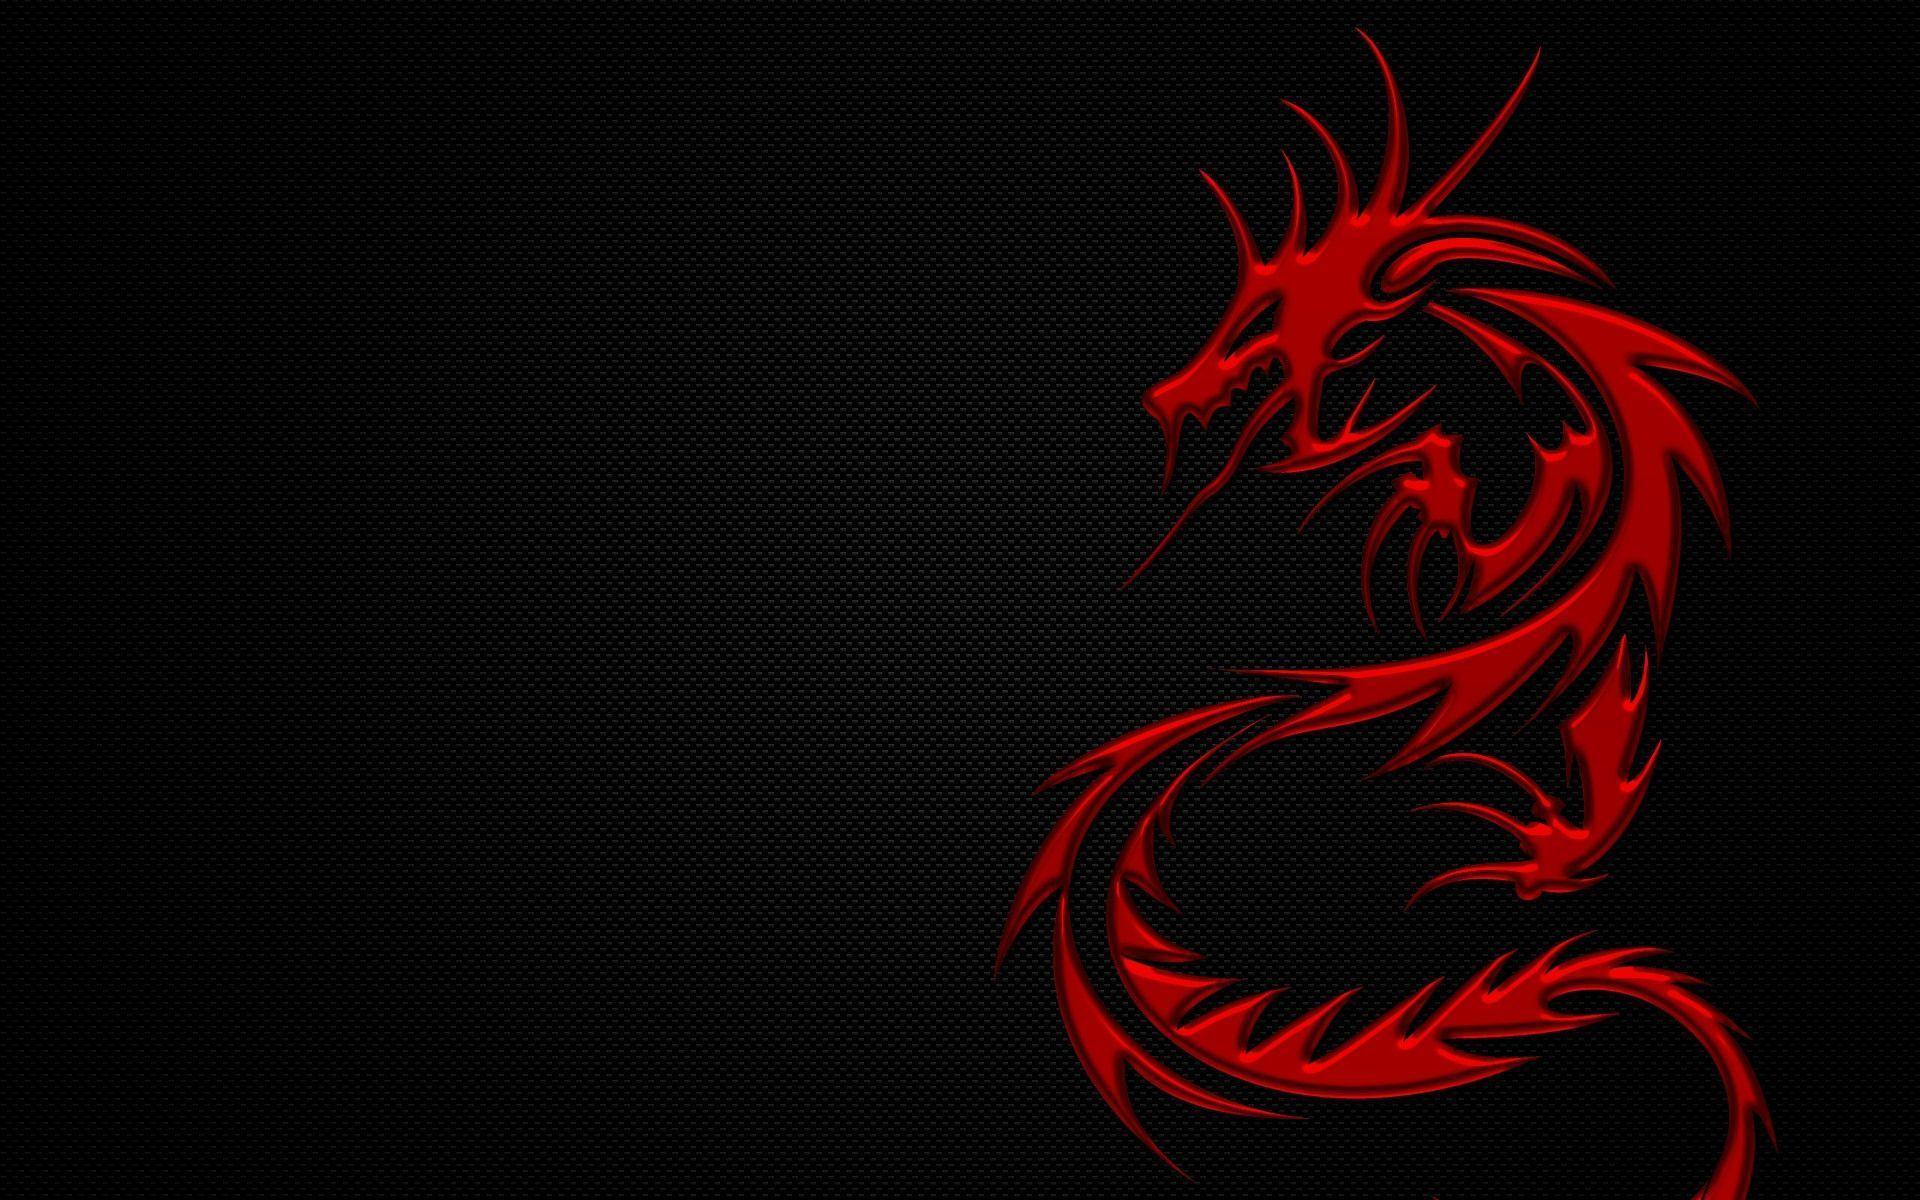 Red Dragon Background - Red Dragon Black Background - HD Wallpaper 